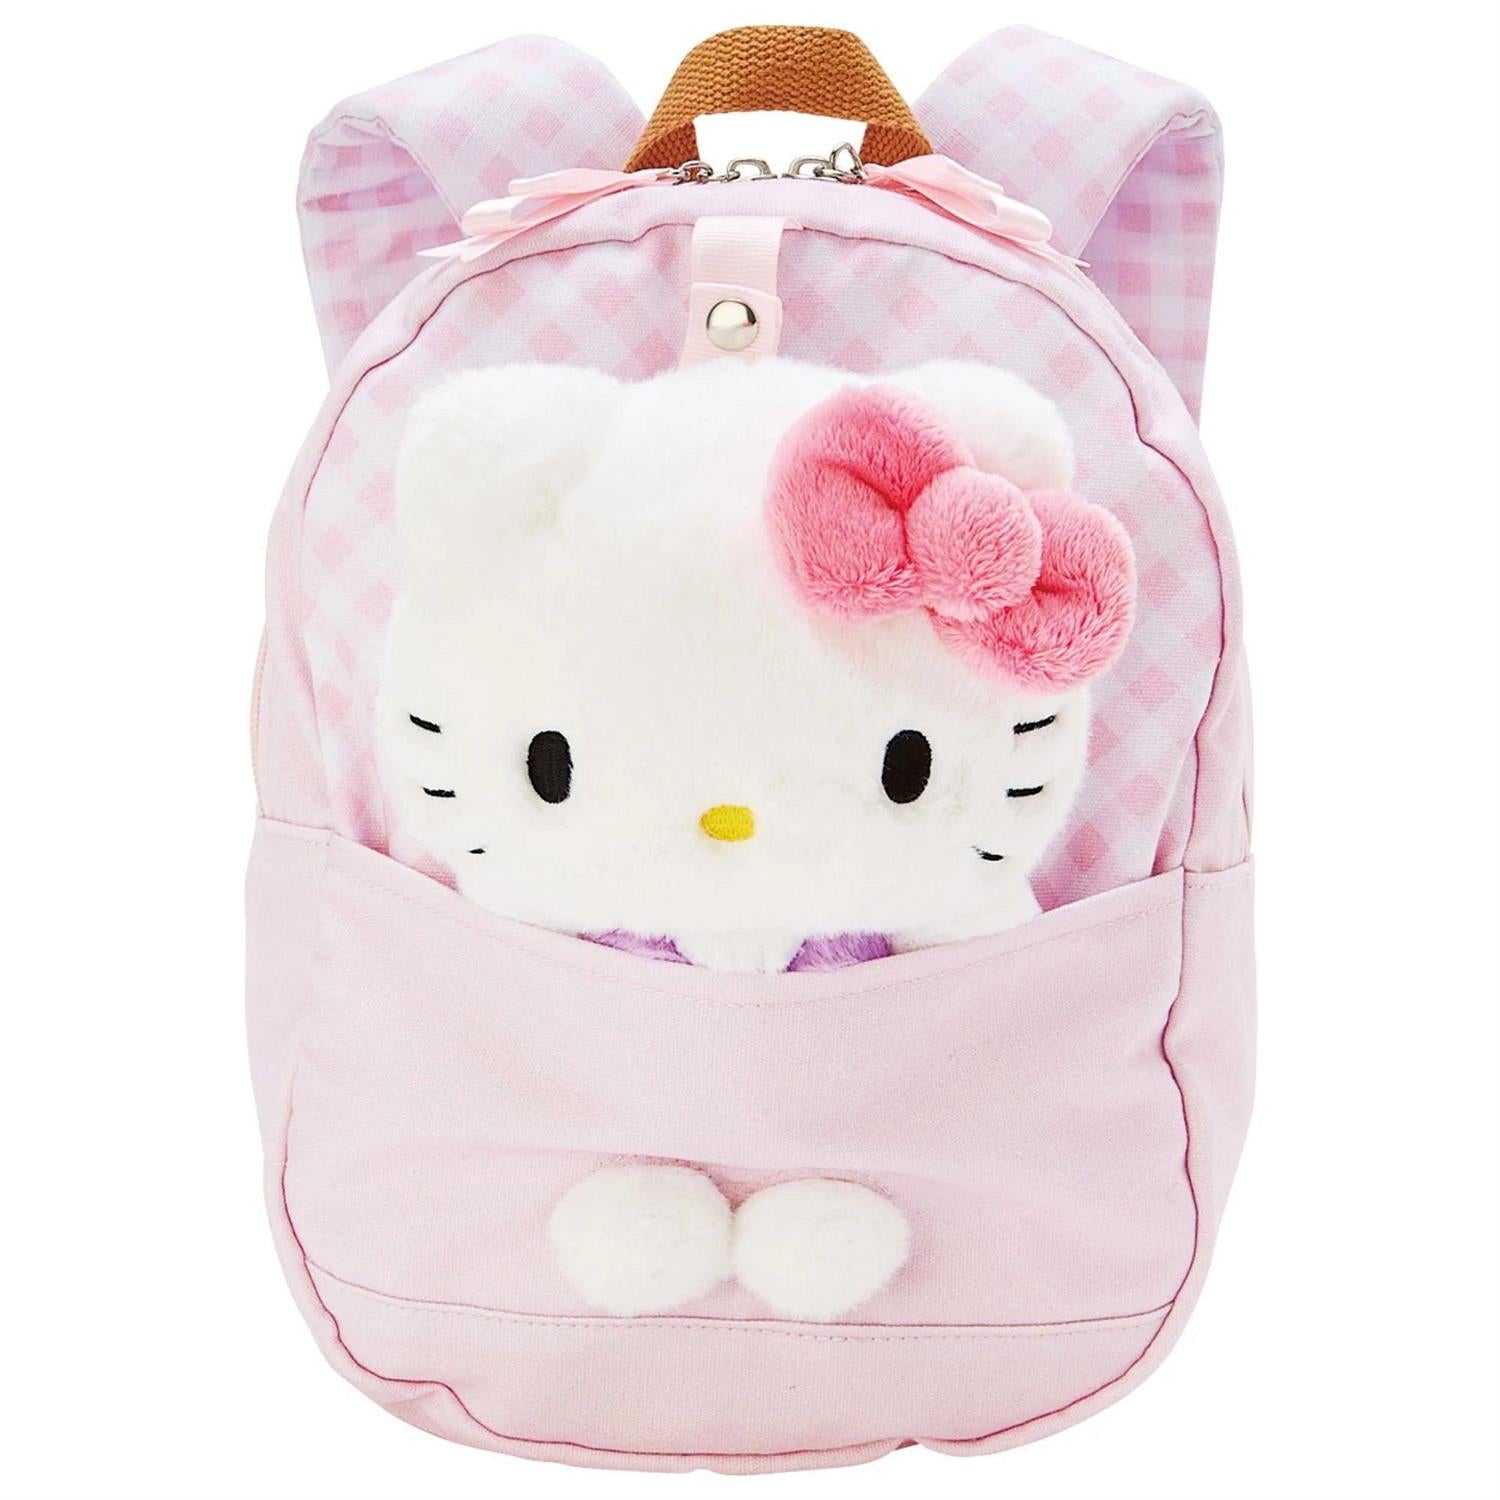 Sanrio Characters Backpack with Plush